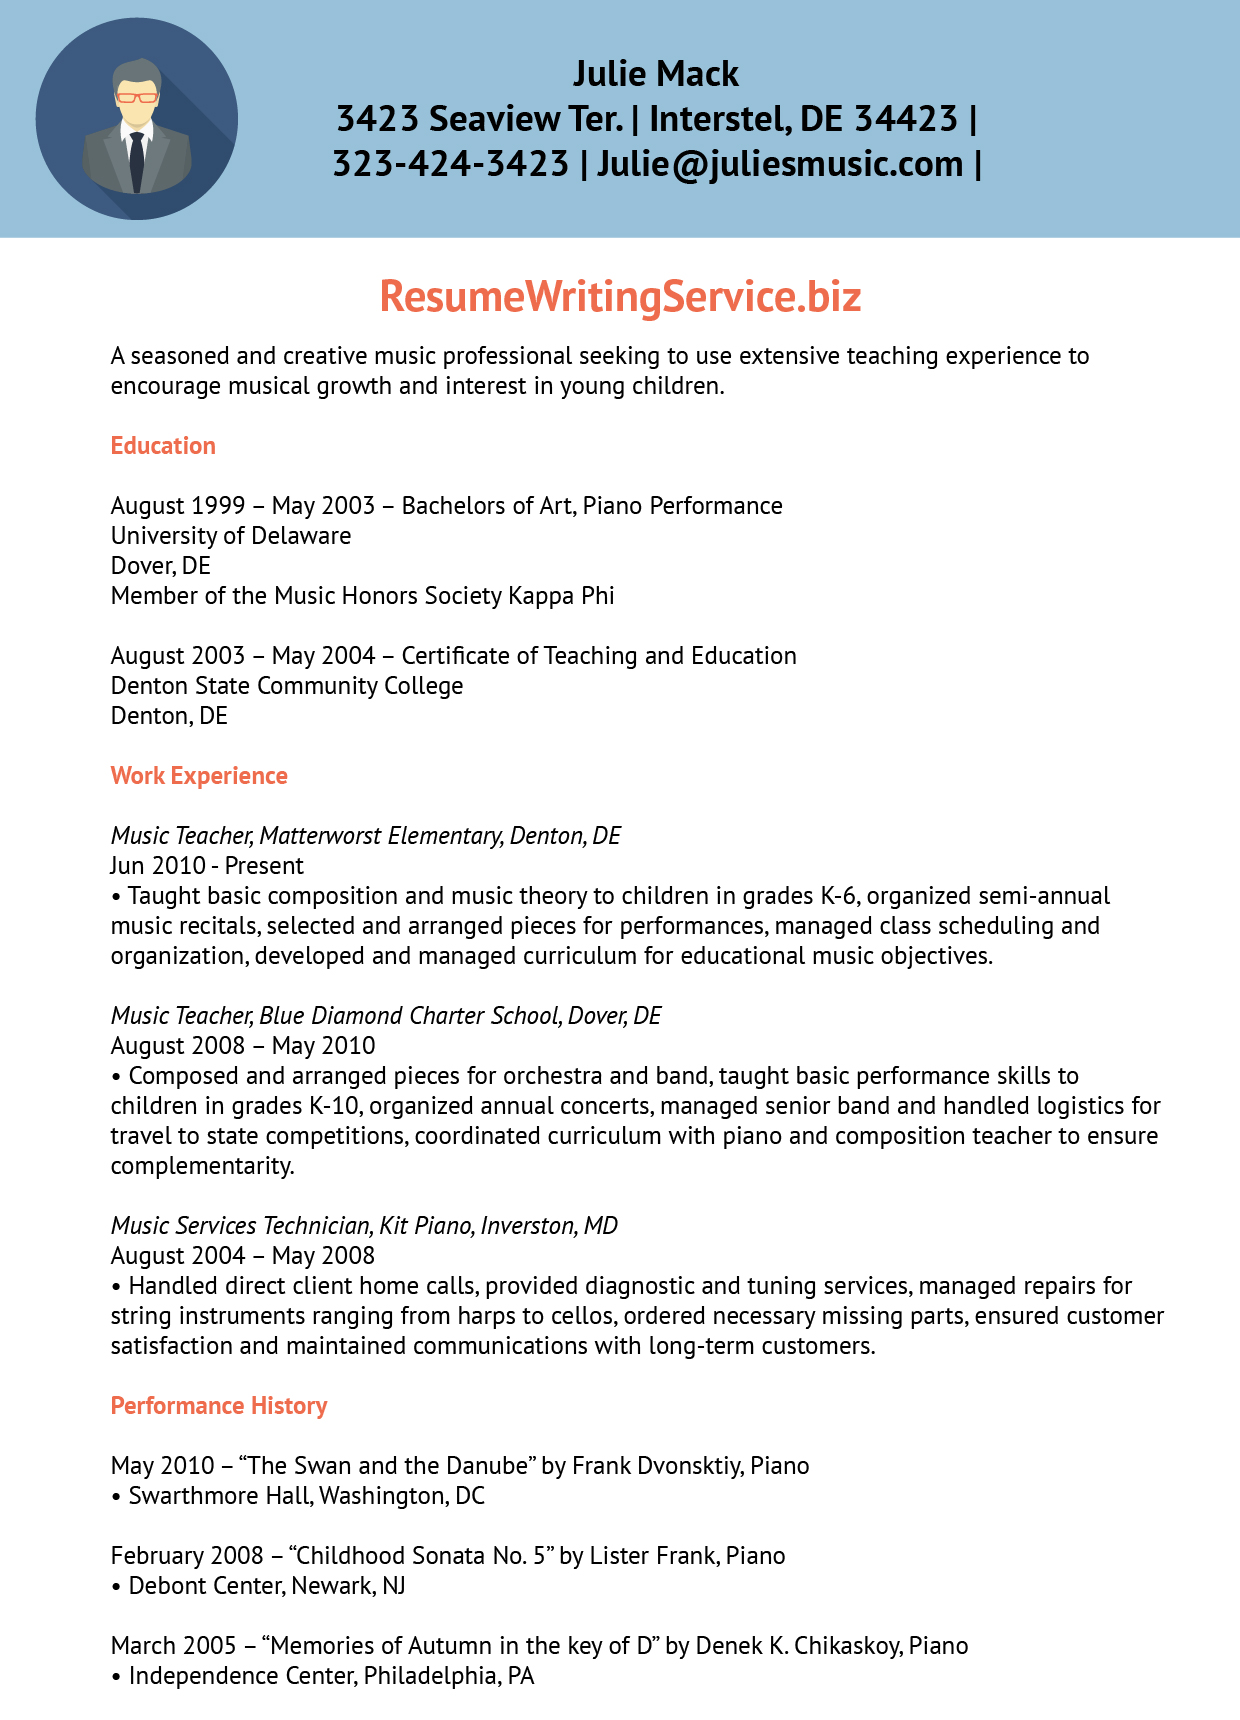 Professional resume writing service for teachers